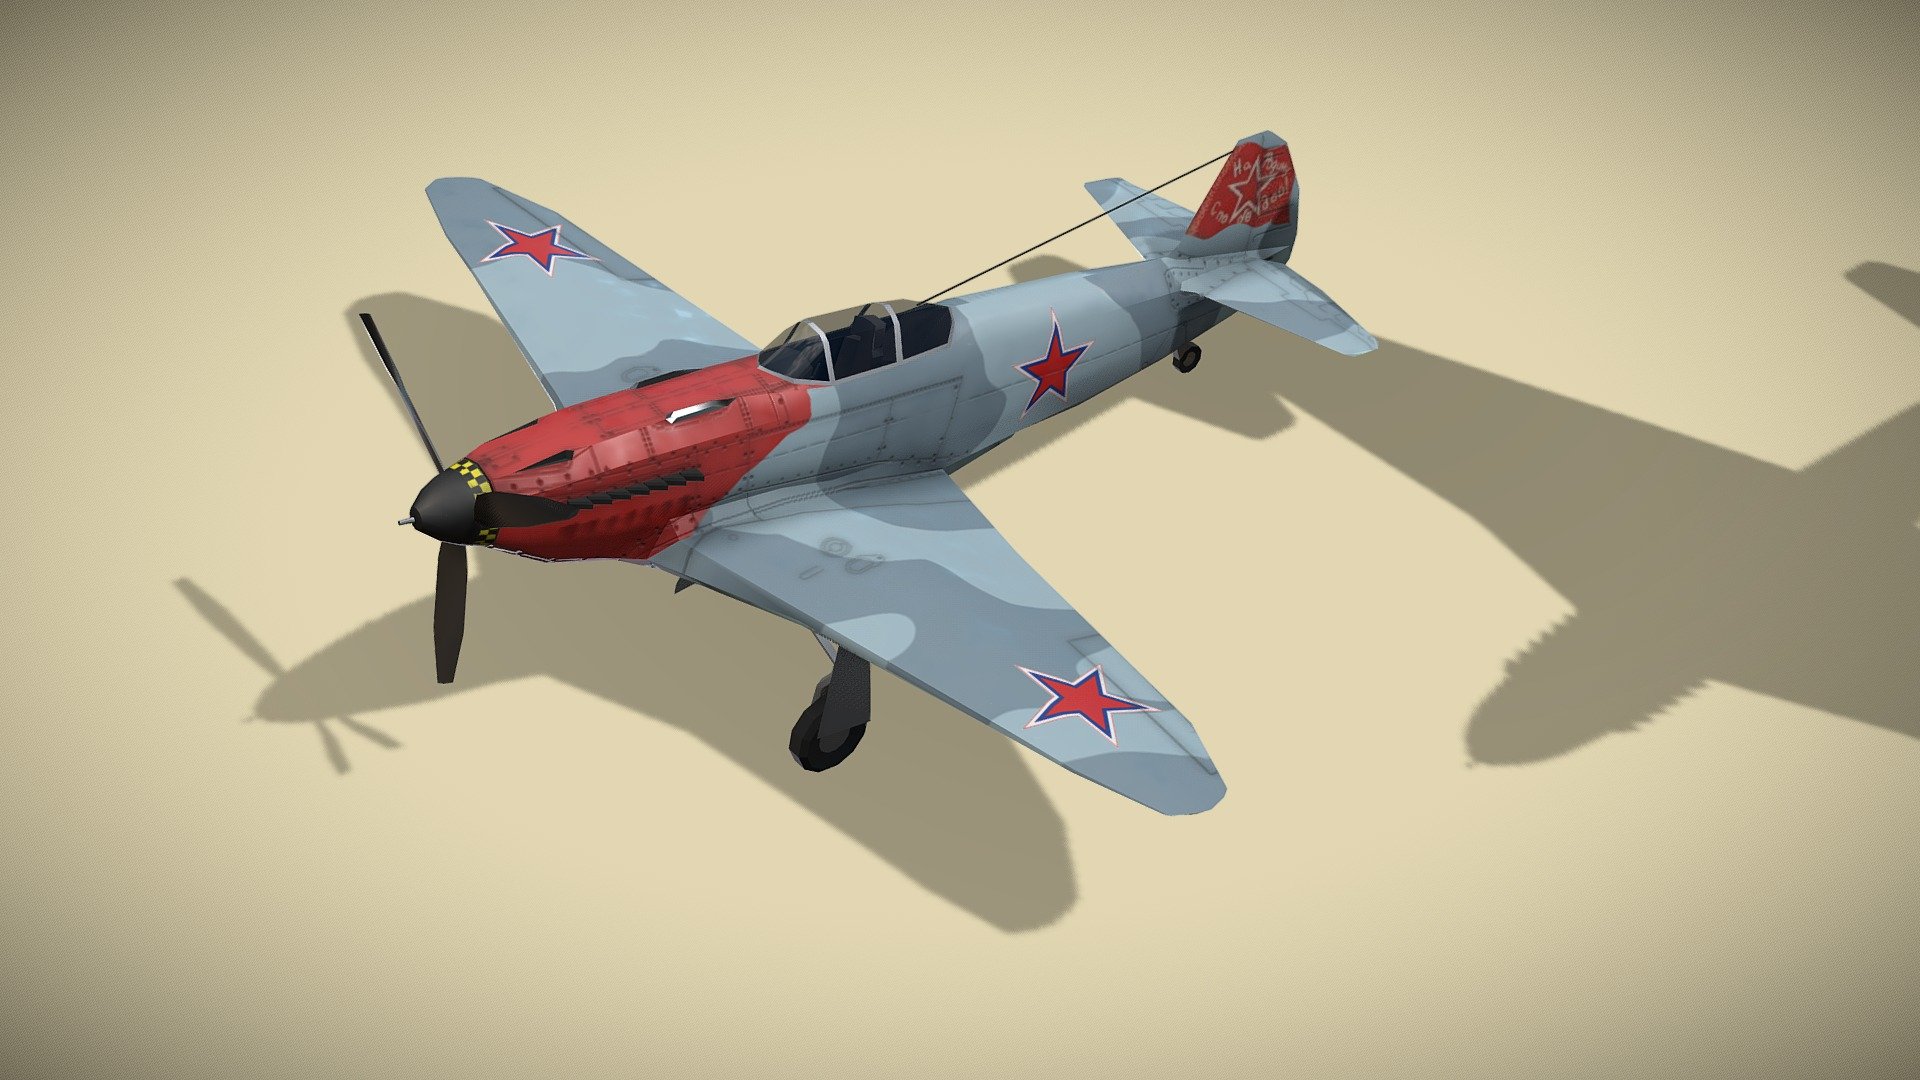 Yakovlev YAK-3

Lowpoly model of soviet fighter plane.



The Yakovlev Yak-3 was a single-engine, single-seat World War II Soviet fighter. Robust and easy to maintain, it was much liked by both pilots and ground crew. One of the smallest and lightest combat fighters fielded by any combatant during the war, its high power-to-weight ratio gave it excellent performance and it proved to be a formidable dogfighter.

Marcel Albert, a World War II French ace who flew the Yak-3 in the USSR with the Normandie-Niémen Group, considered it a superior aircraft to the P-51D Mustang and Supermarine Spitfire. It was also flown by Polish Air Forces (of the Polish People's Army formed in USSR) and the Yugoslav Air Force, after the war.



1 standing version and 2 flying versions in set.

Model has bump map, roughness map and 3 x diffuse textures.



Check also my other aircrafts and cars.

Patreon with monthly free model - Yakovlev YAK-3 - Buy Royalty Free 3D model by NETRUNNER_pl 3d model